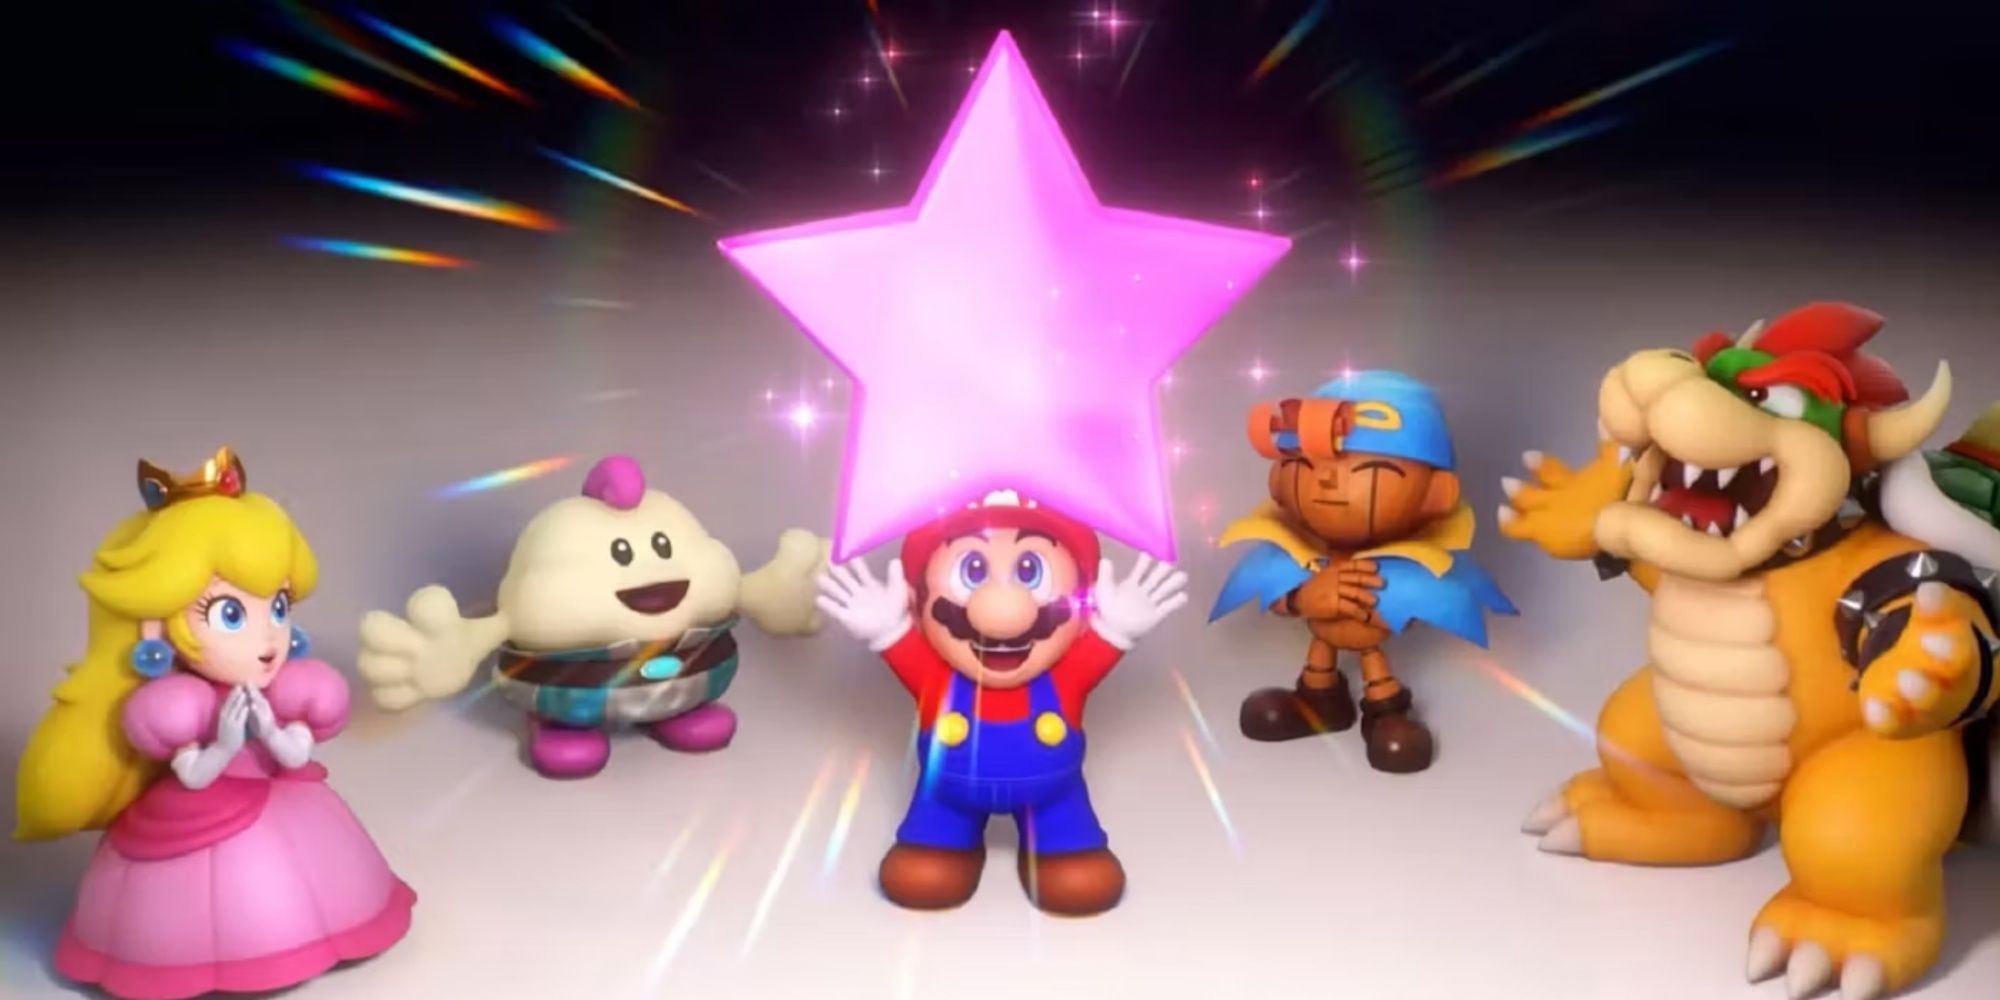 Mario surrounded by the cast of Super Mario RPG